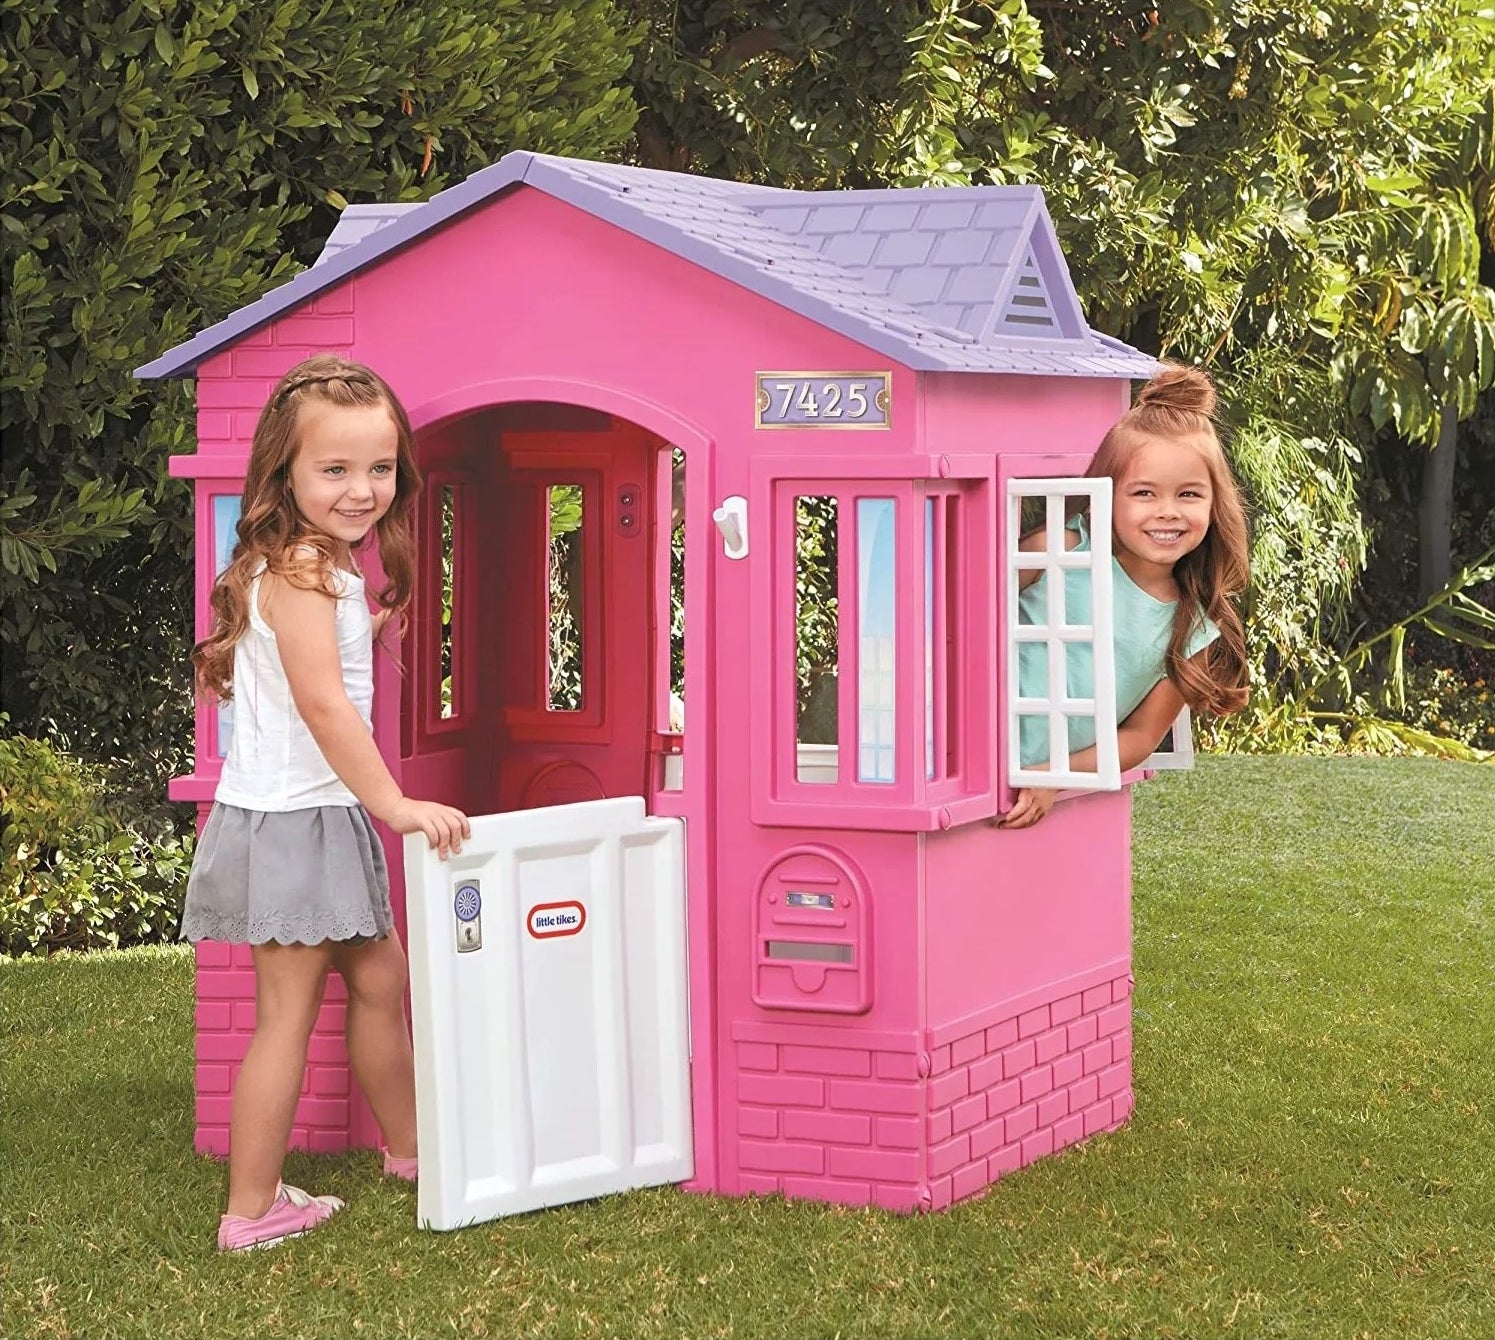 Two children playing with the pink playhouse